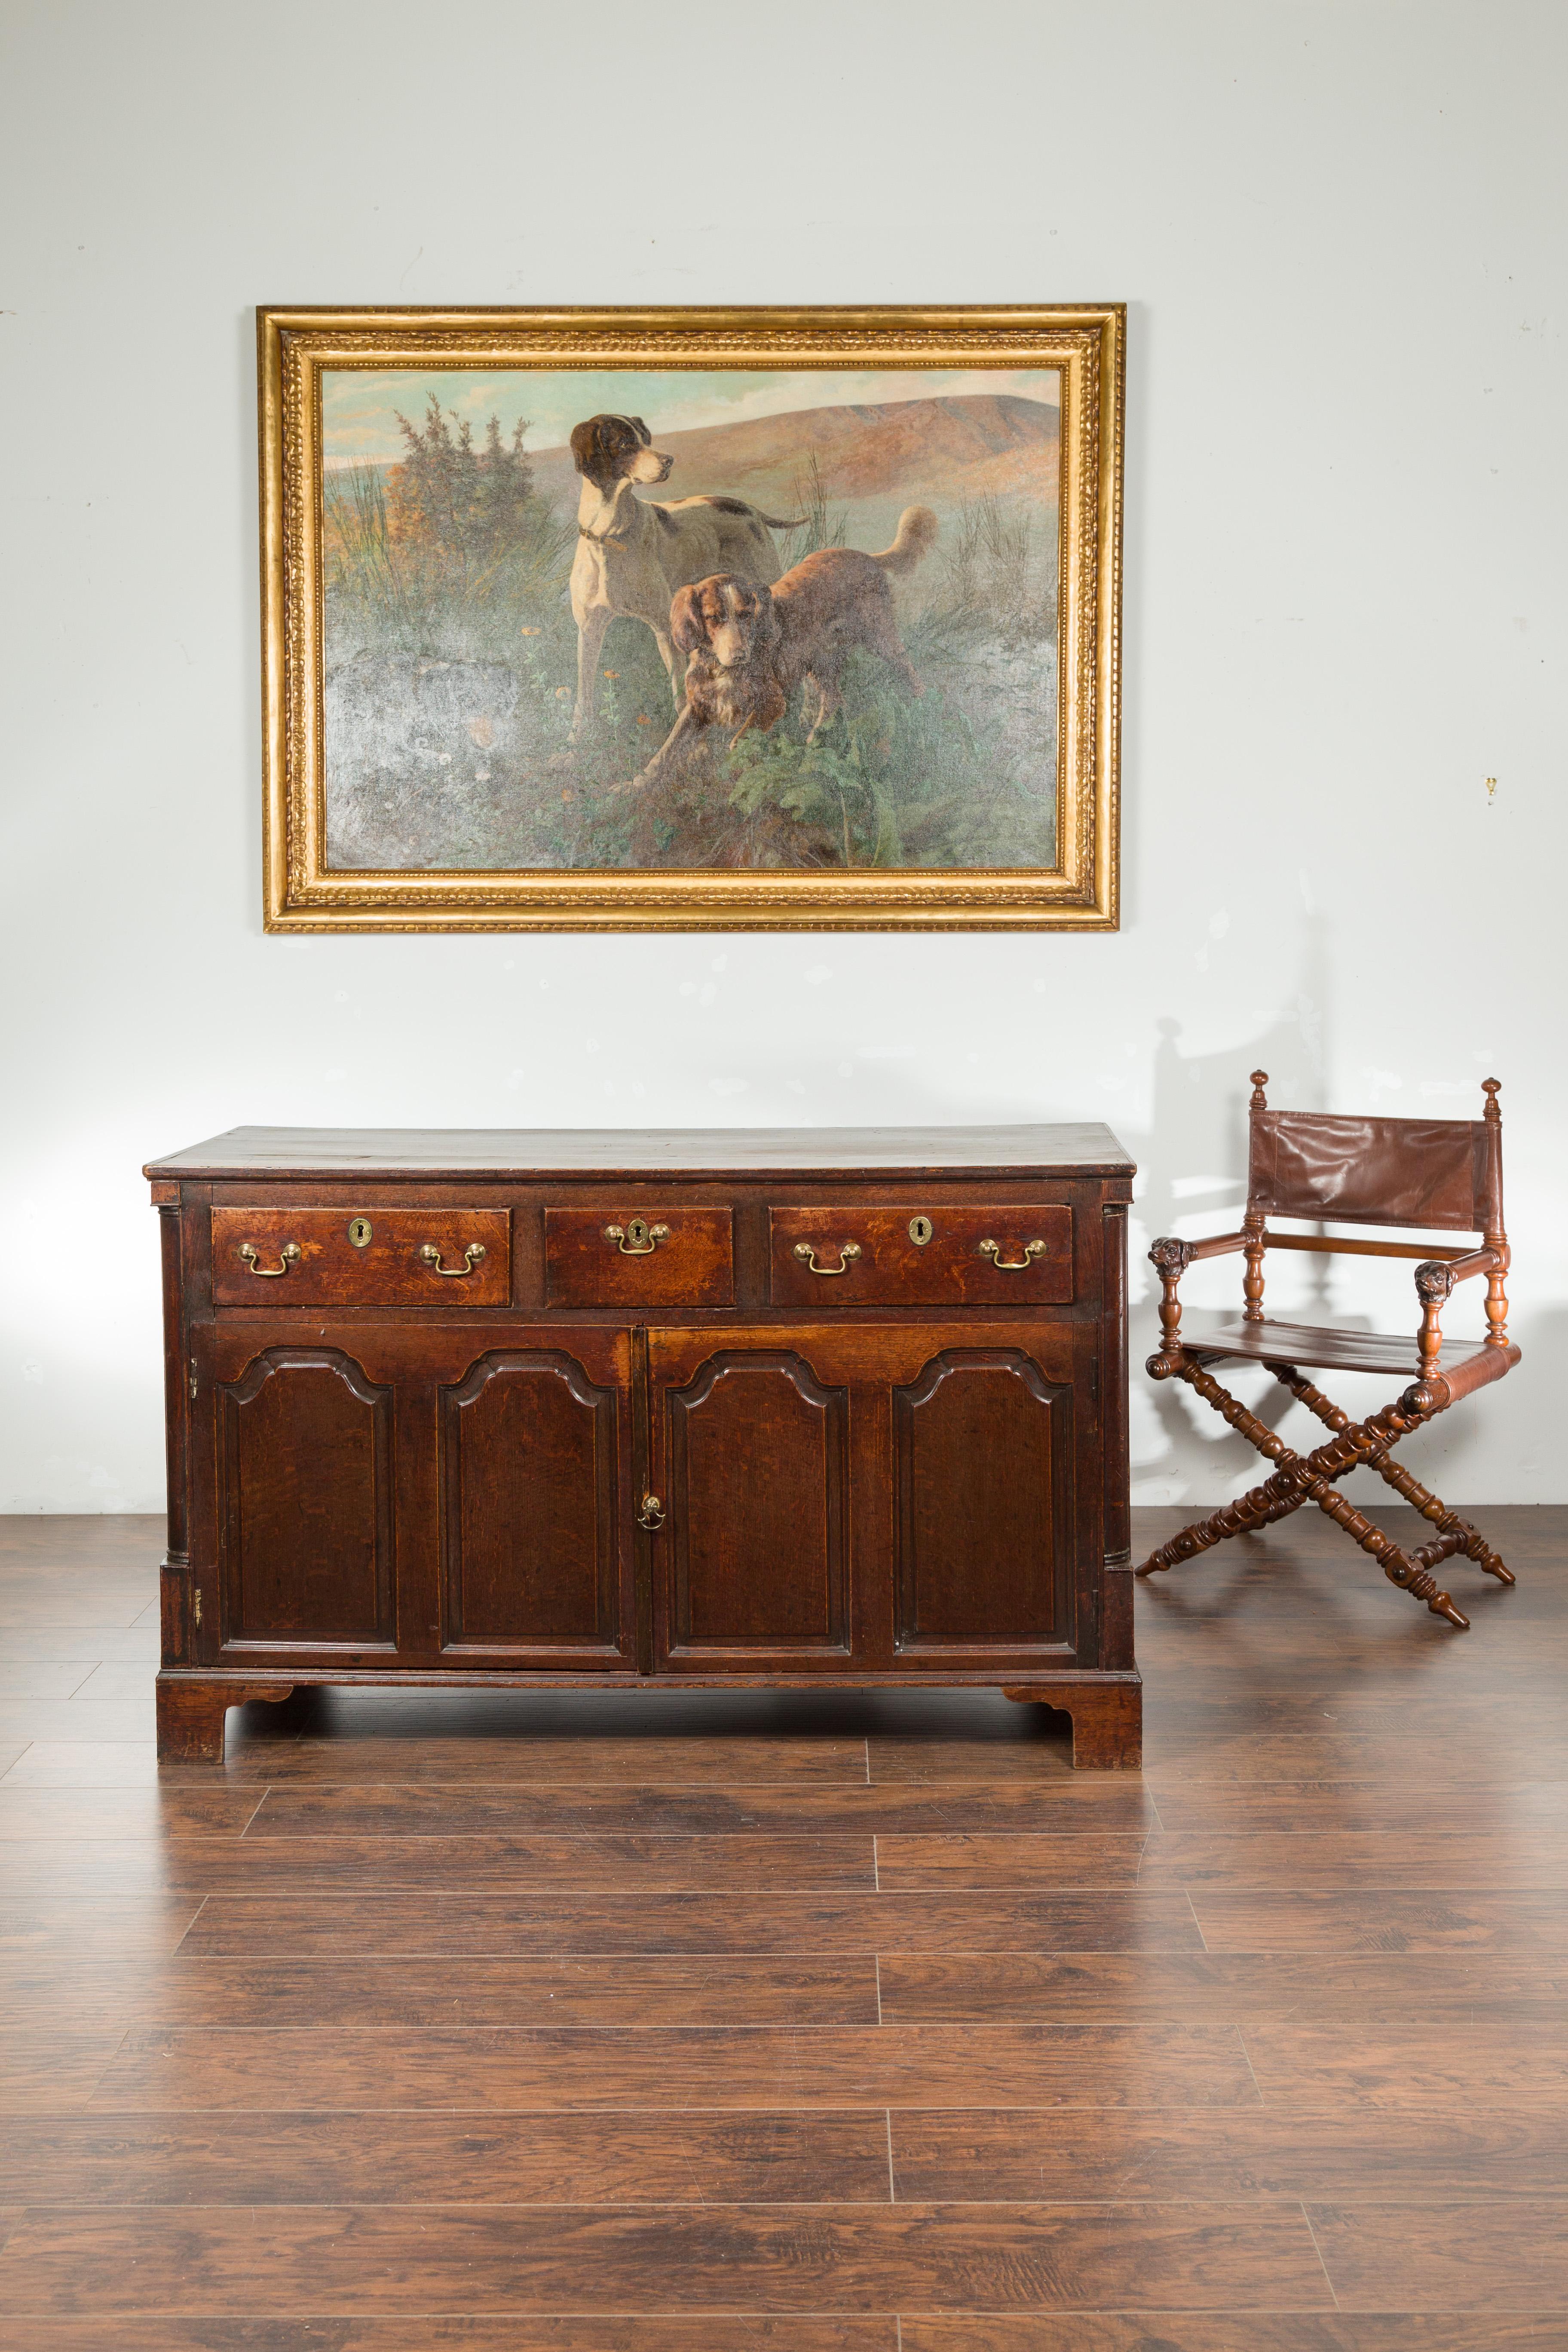 An English Georgian period oak buffet from the early 19th century, with three drawers and two doors. Created in England during the early years of the 19th century, this oak buffet features a nicely distressed rectangular planked top, sitting above